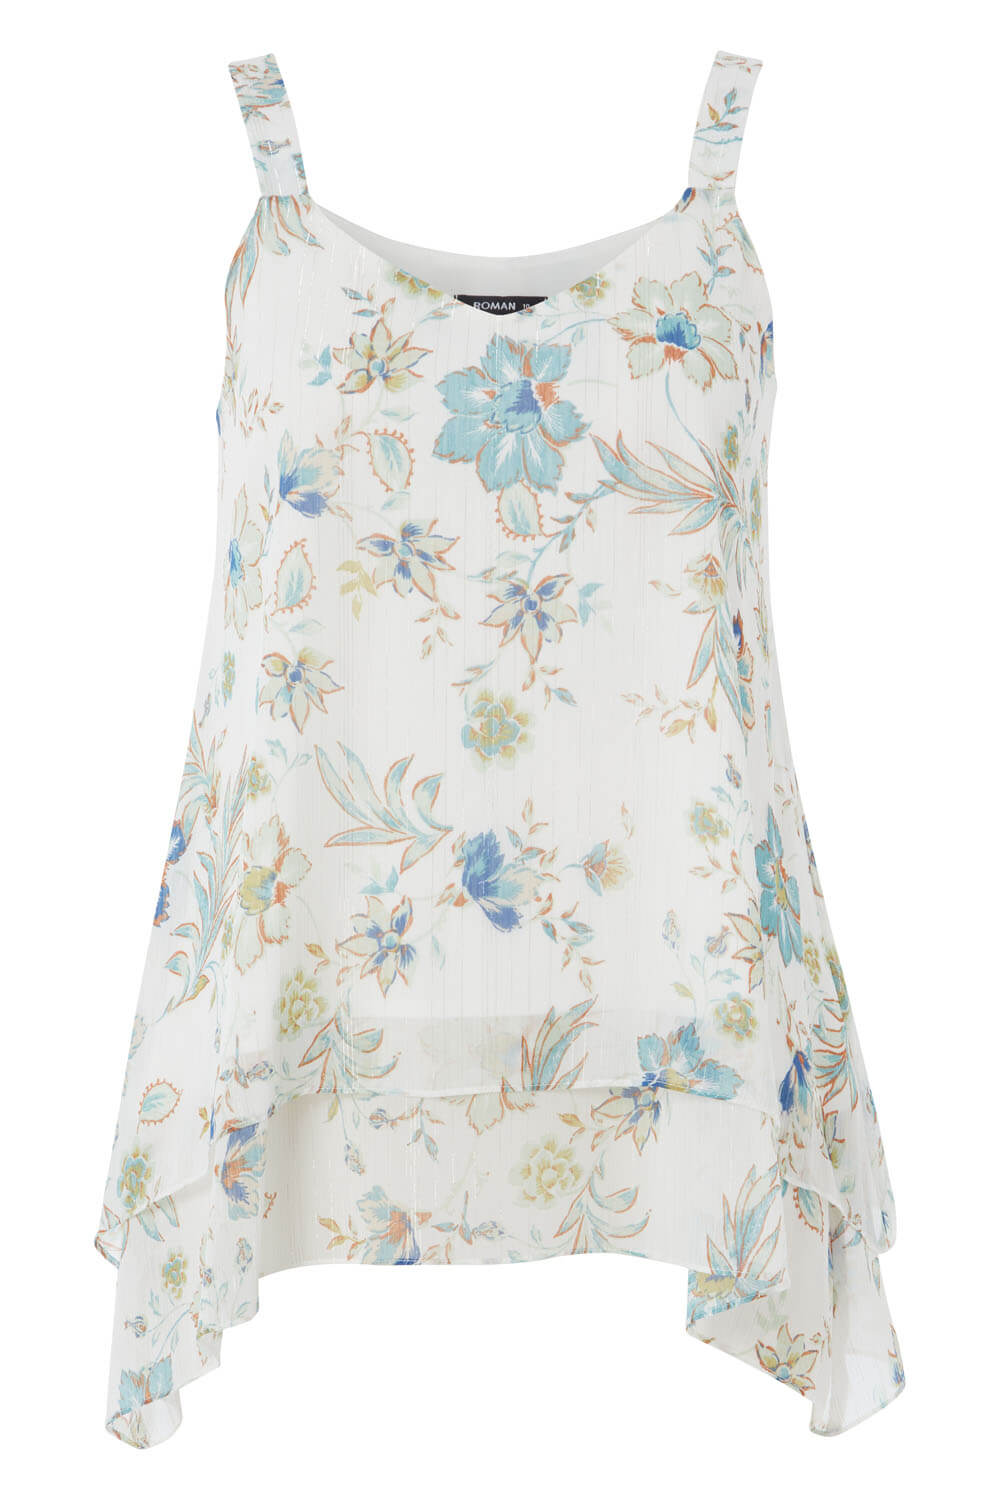 Ivory  Floral Shimmer Camisole Top, Image 5 of 5